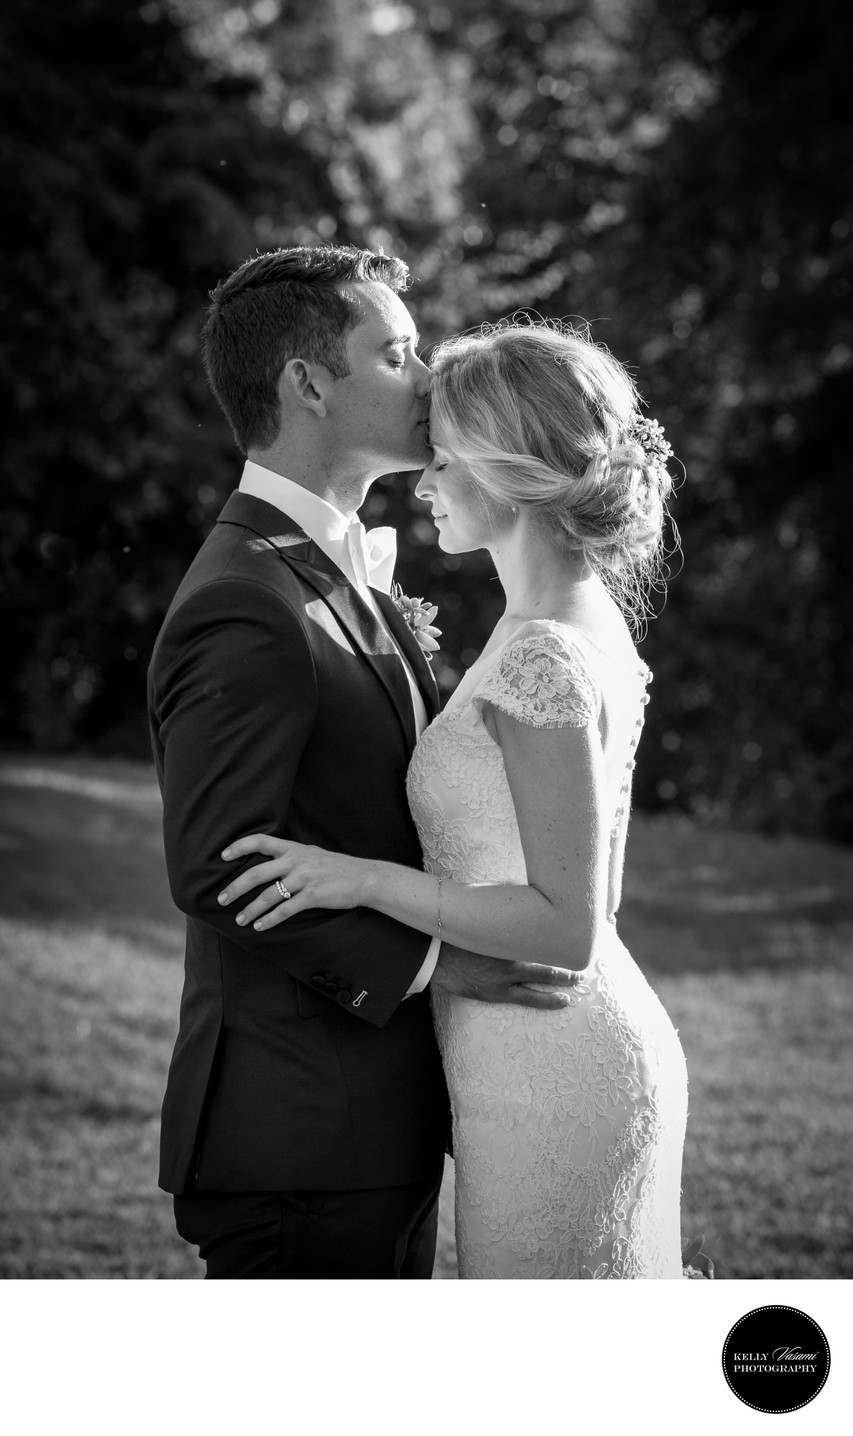 Black & White Intimate Moment Between Bride and Groom